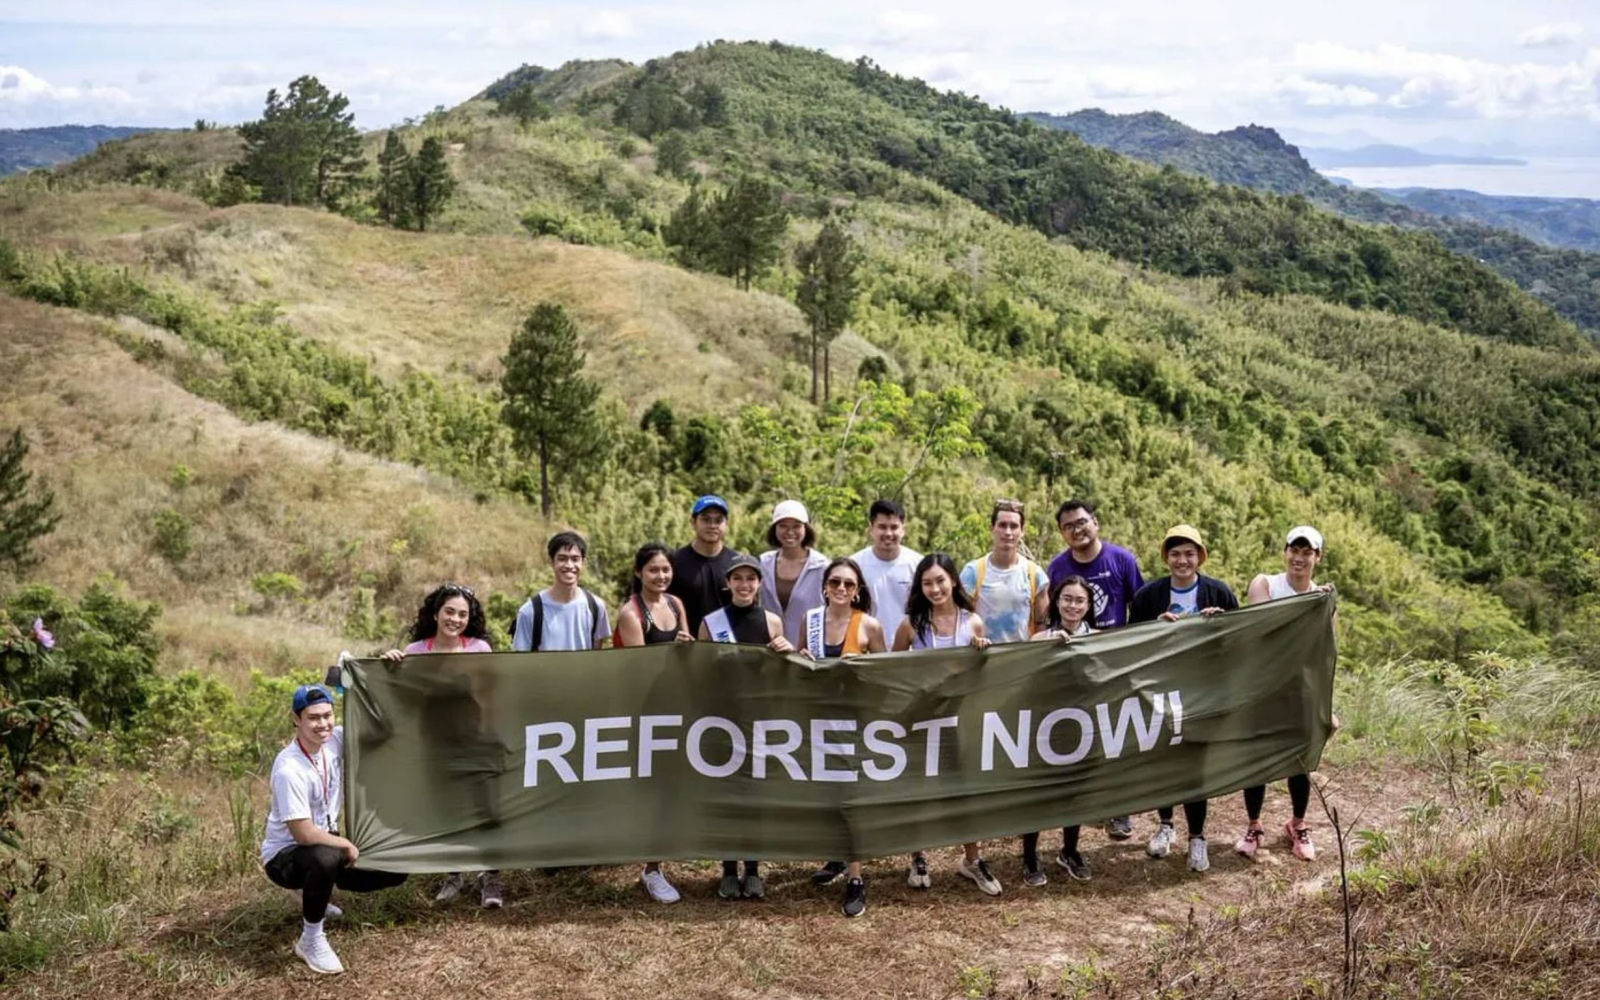 Group shot of Masungi Staff. They are holding a banner that says "Reforest Now". 